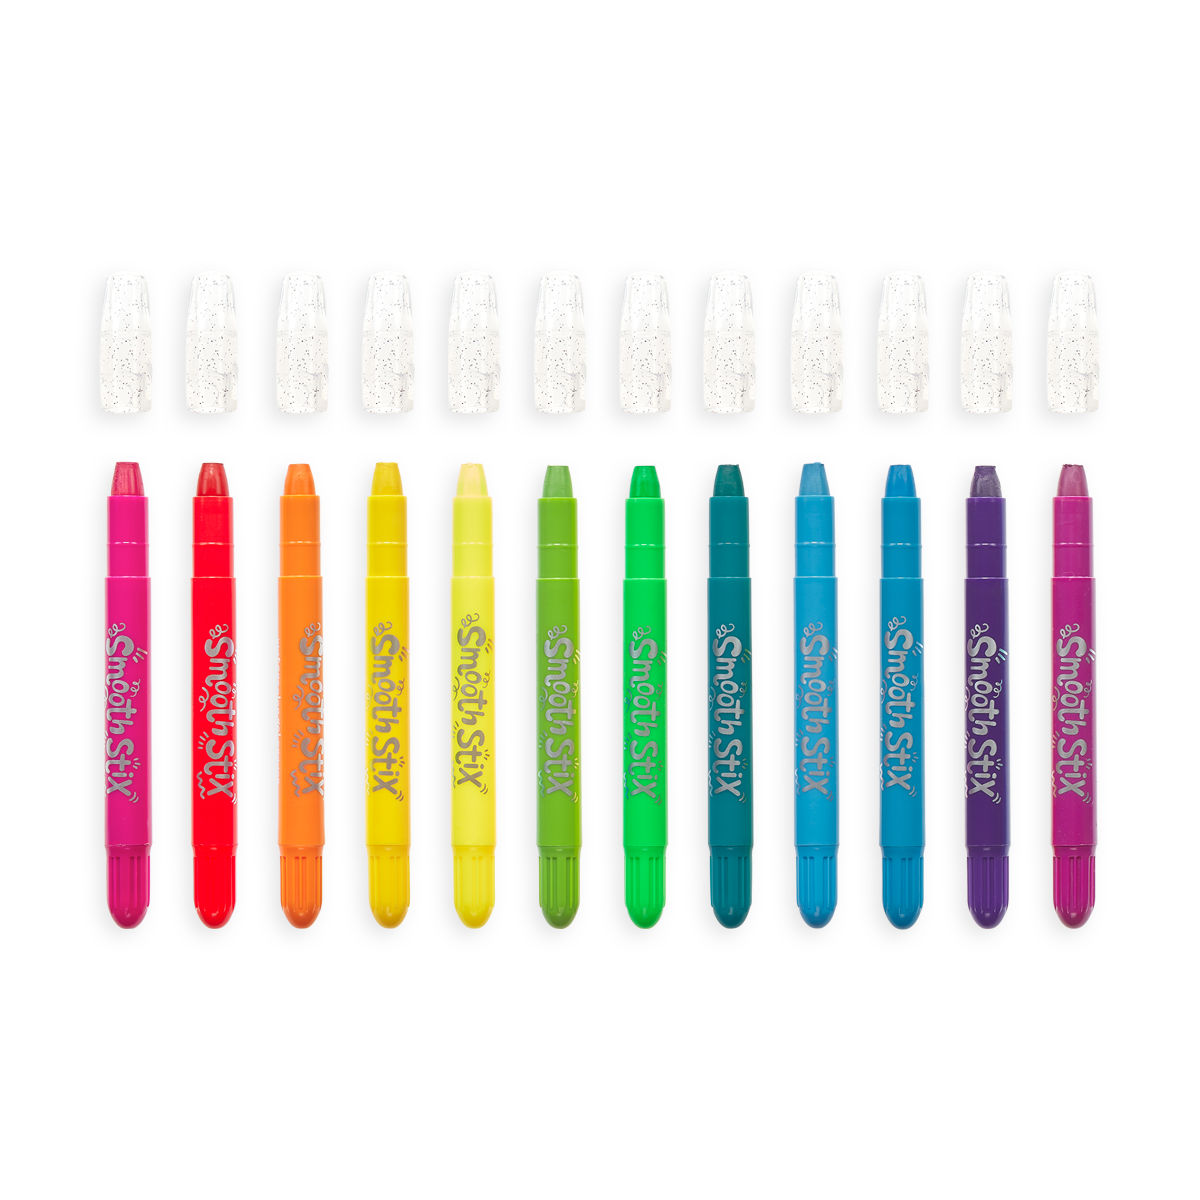 24 PC Water Color Gel Crayons Non-Toxic Coloring Washable Drawing Silky  Crayon, 1 - Harris Teeter